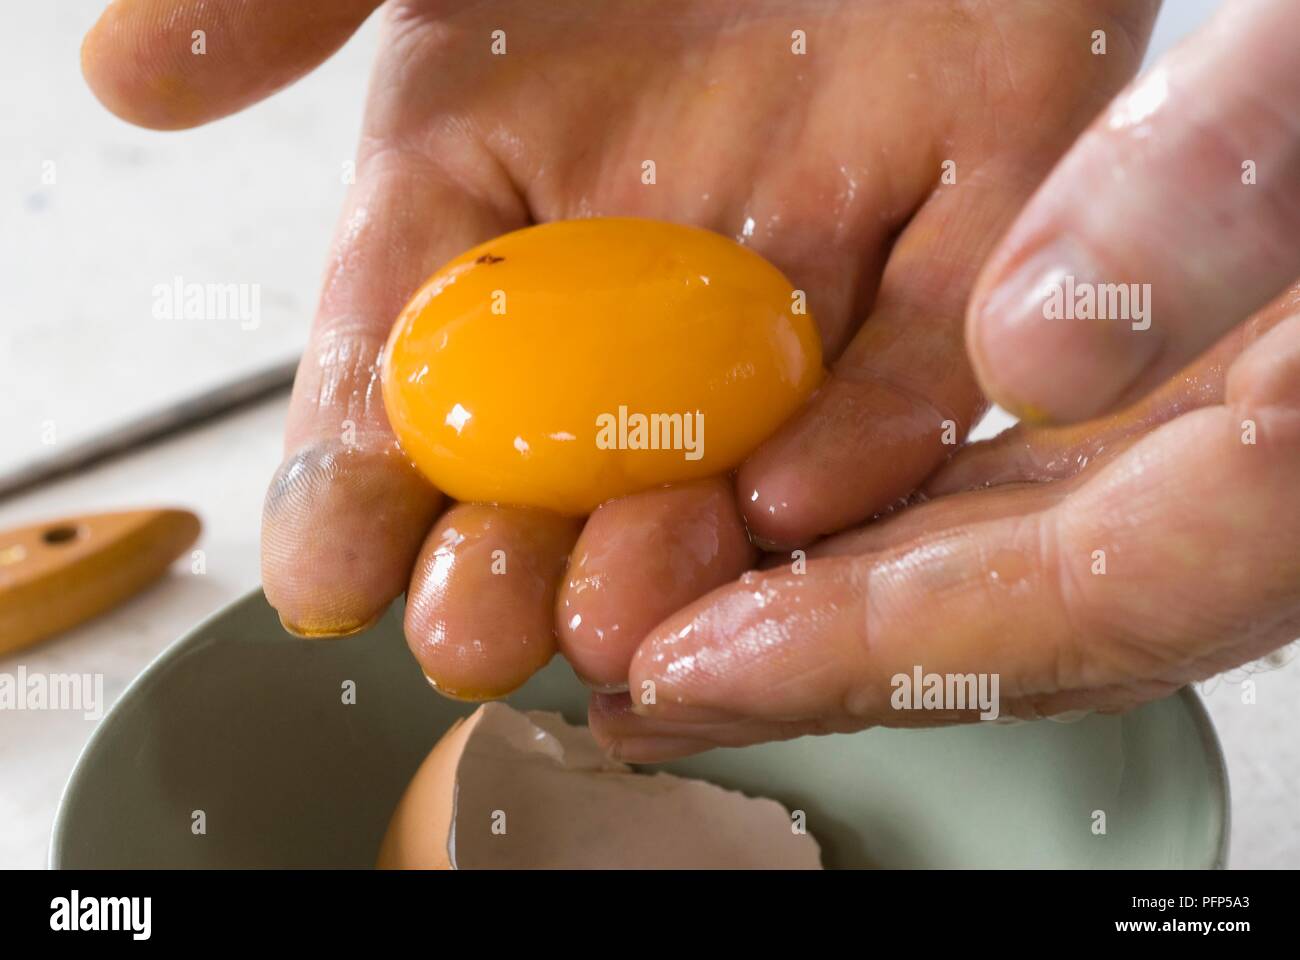 Hands holding egg yolk above bowl (mixing tempera paint), close-up Stock Photo